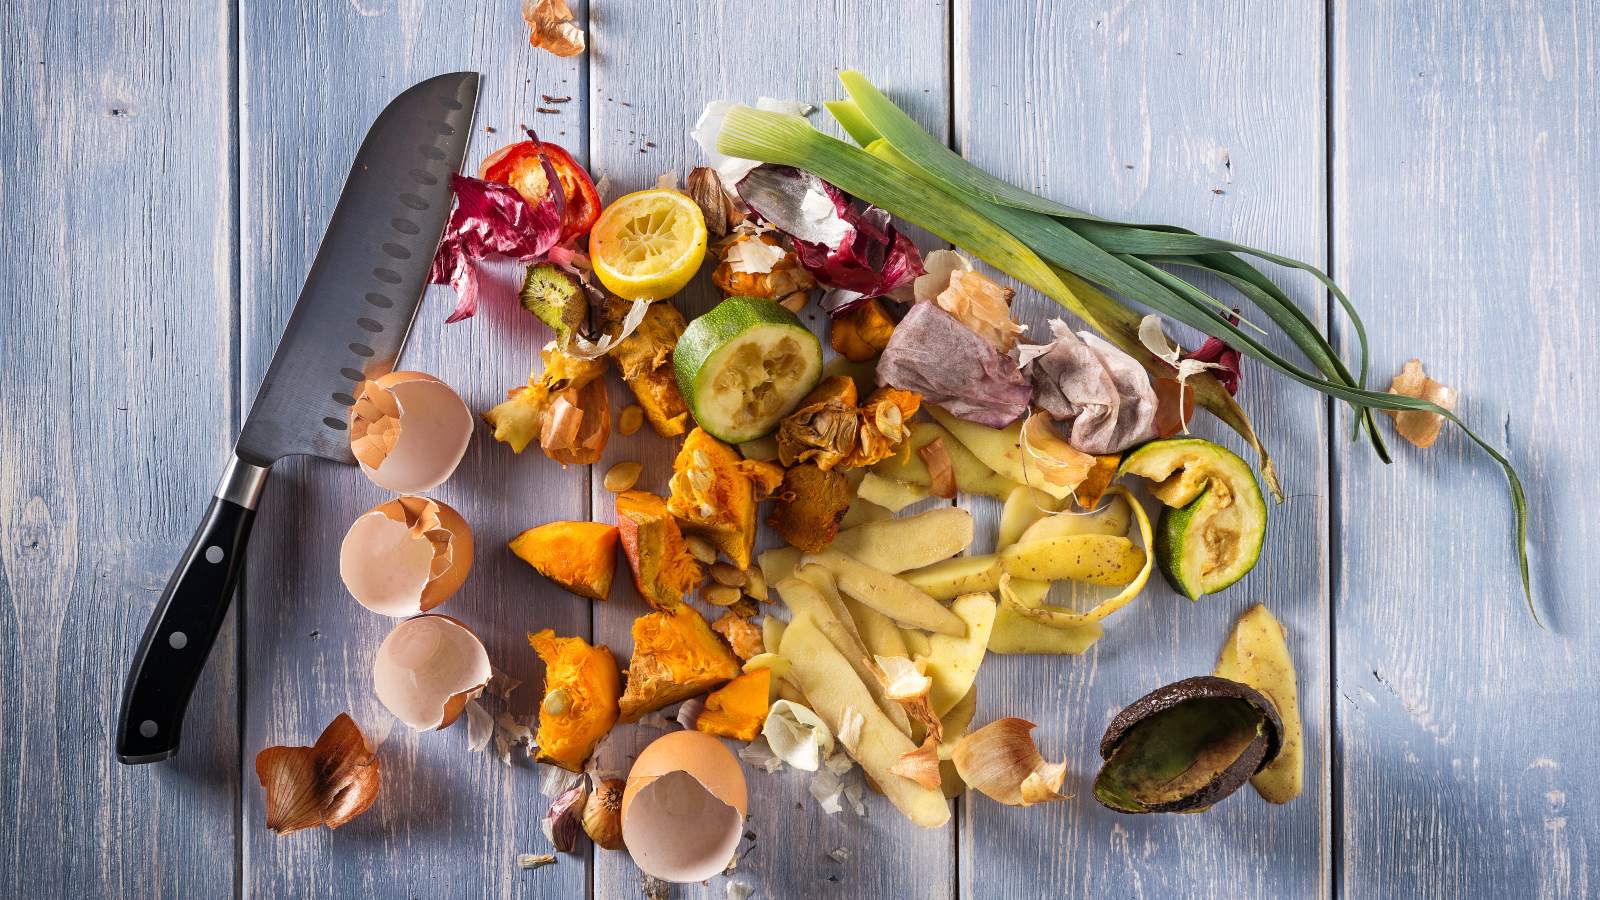 Trash to treasure: Three organisations that upcycle food waste into ...